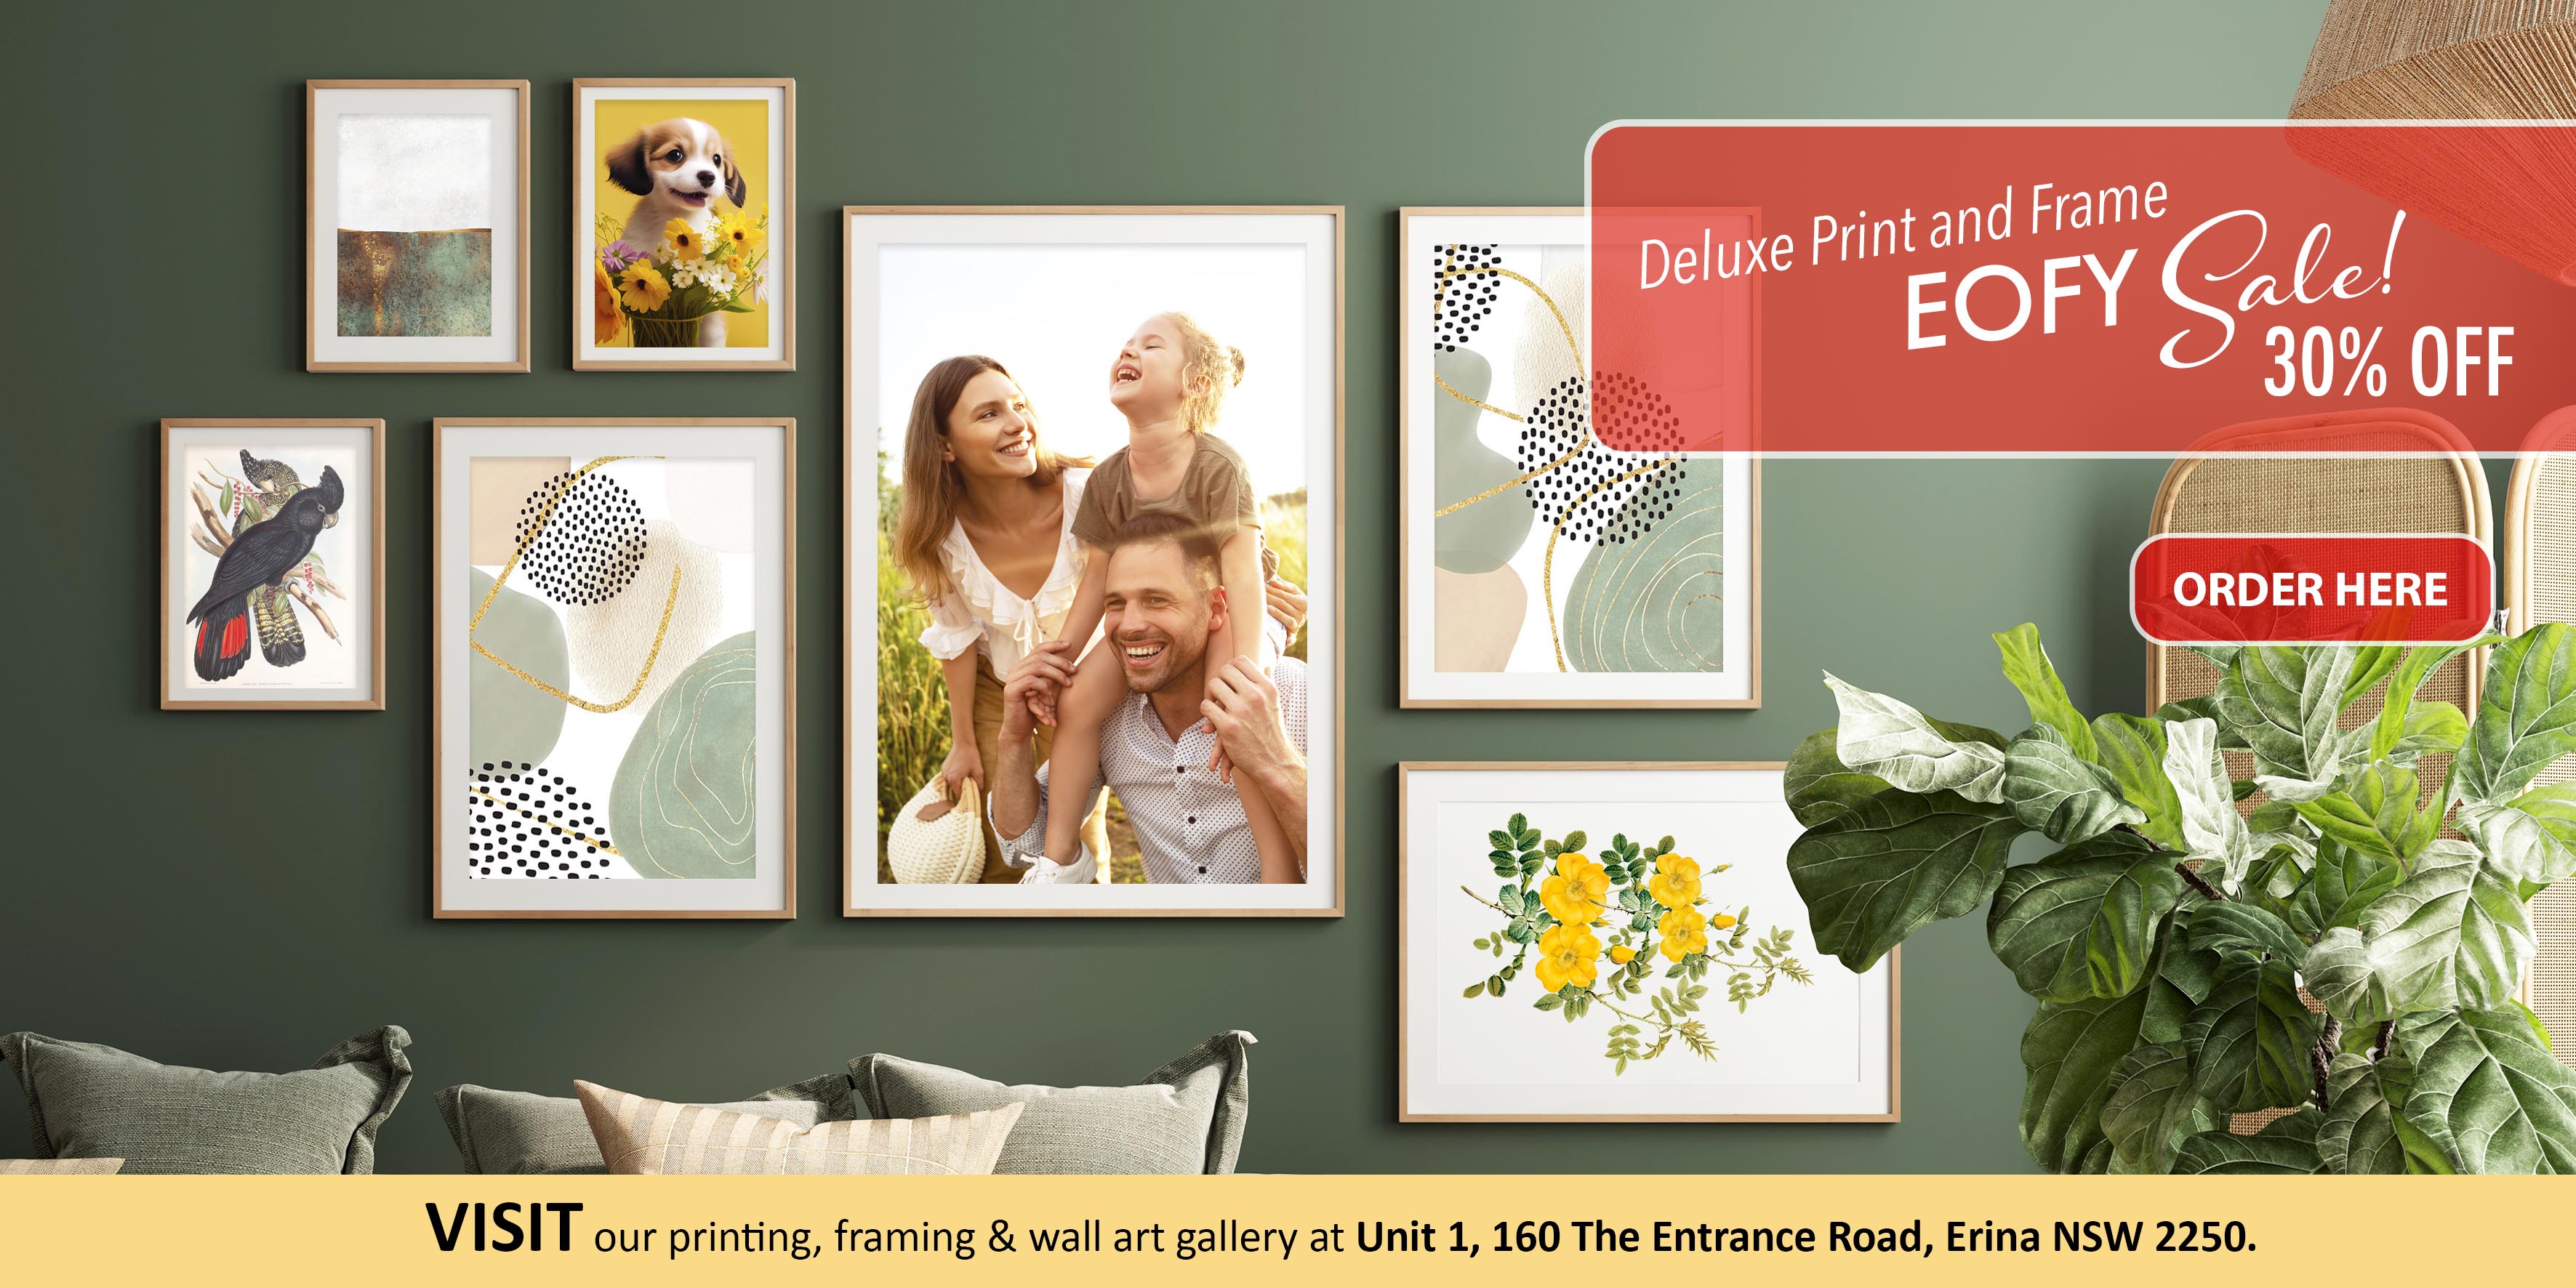 Deluxe Art Print and Frame EOFY Sale Slide_16May24.jpg__PID:1efaff54-4e0c-4df8-b74a-a163134c55c1